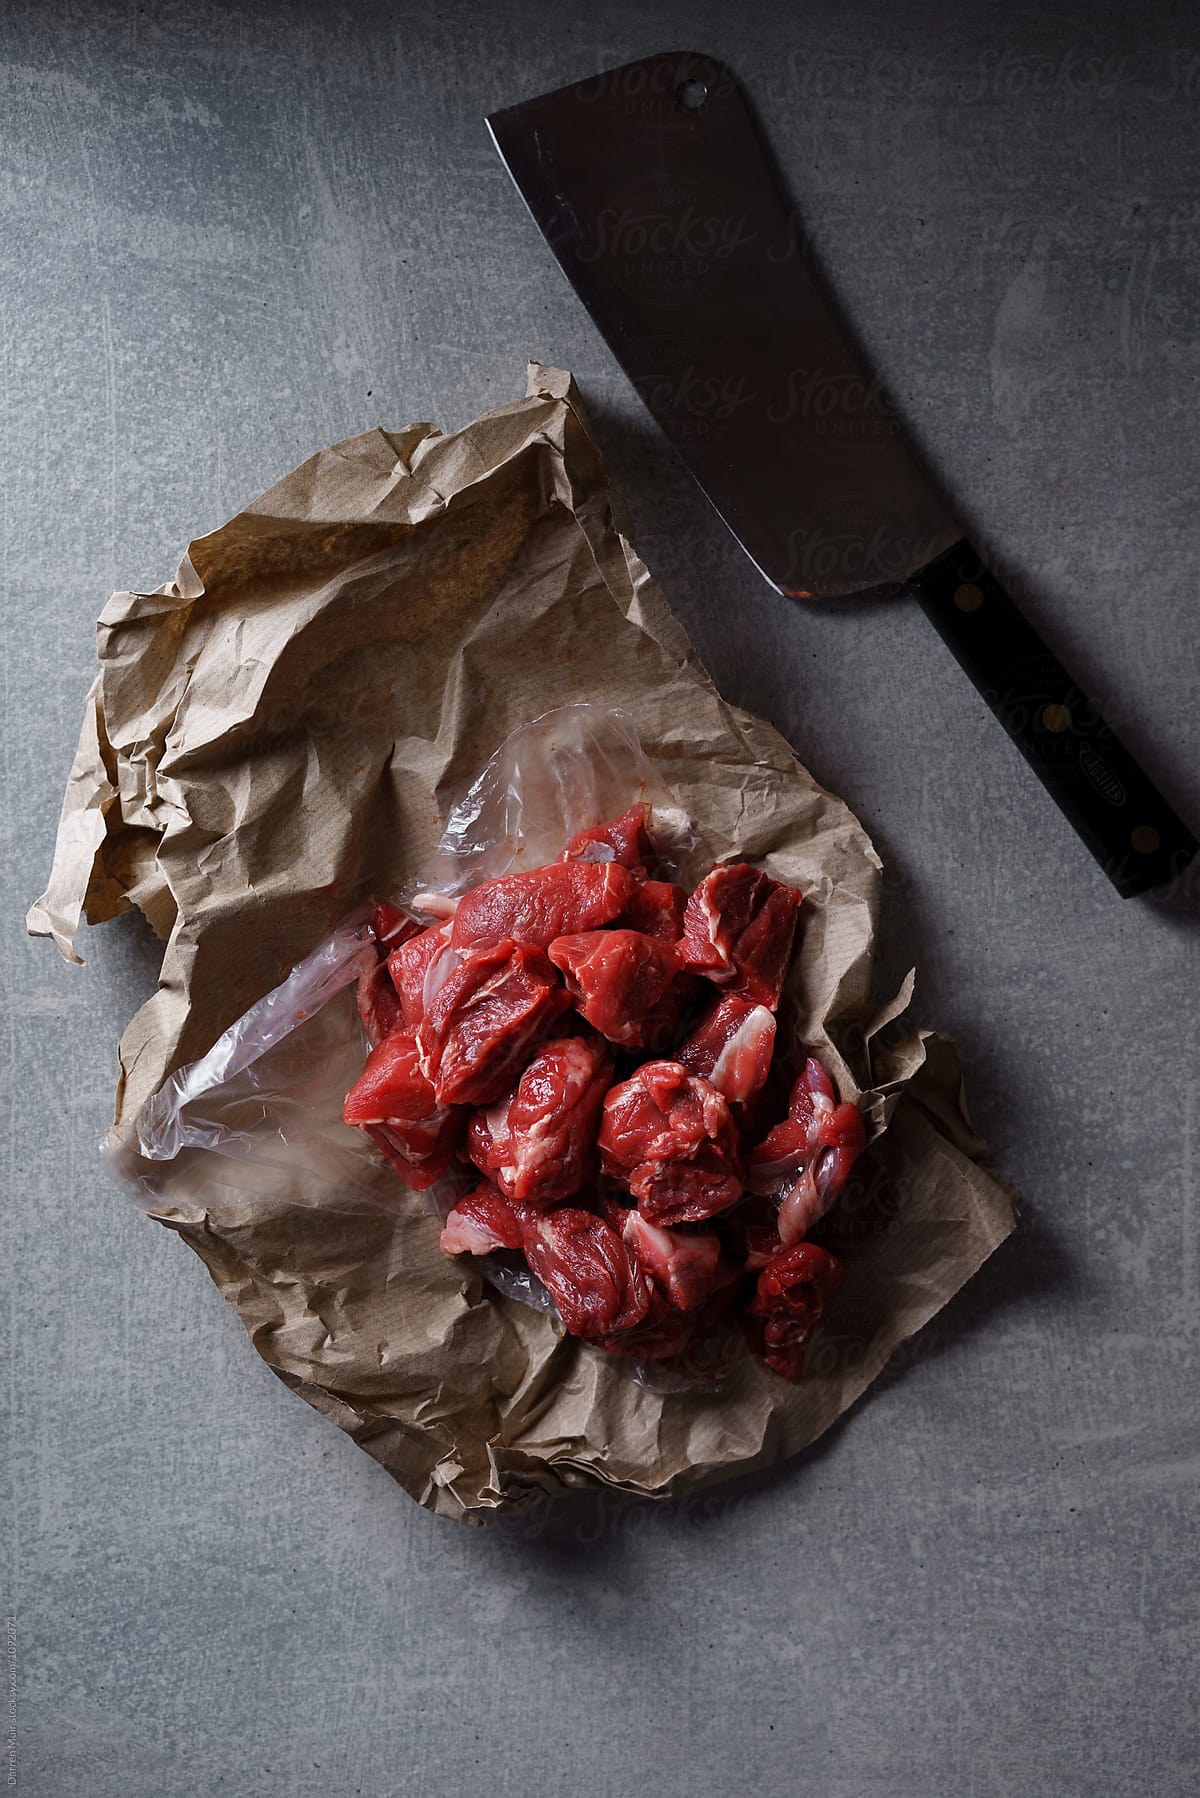 Fresh diced beef in butchers paper and a meat cleaver on stone background.